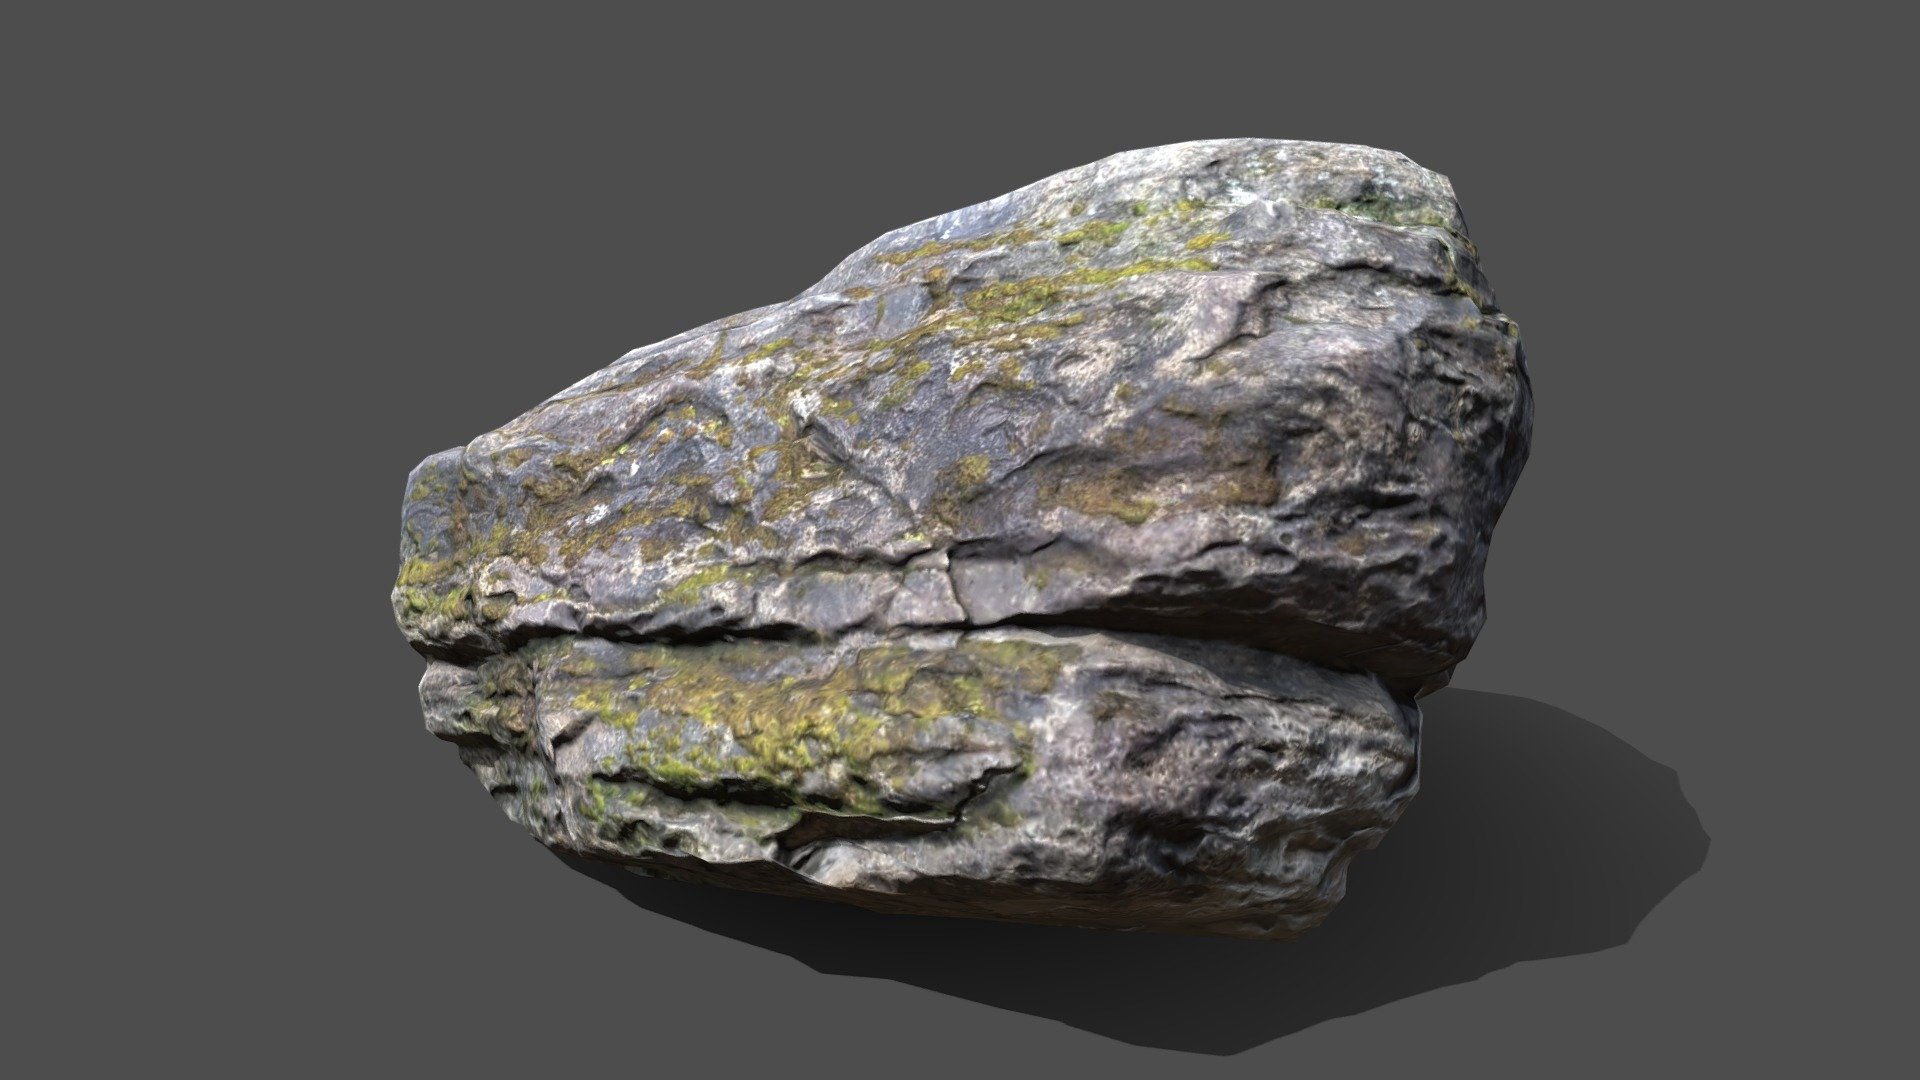 A photogrammetry project, with retopo and LODs.
Check the story out on Artstation.
https://www.artstation.com/artwork/bKLqKa - Mossy Rock - 3D model by Danreit 3d model